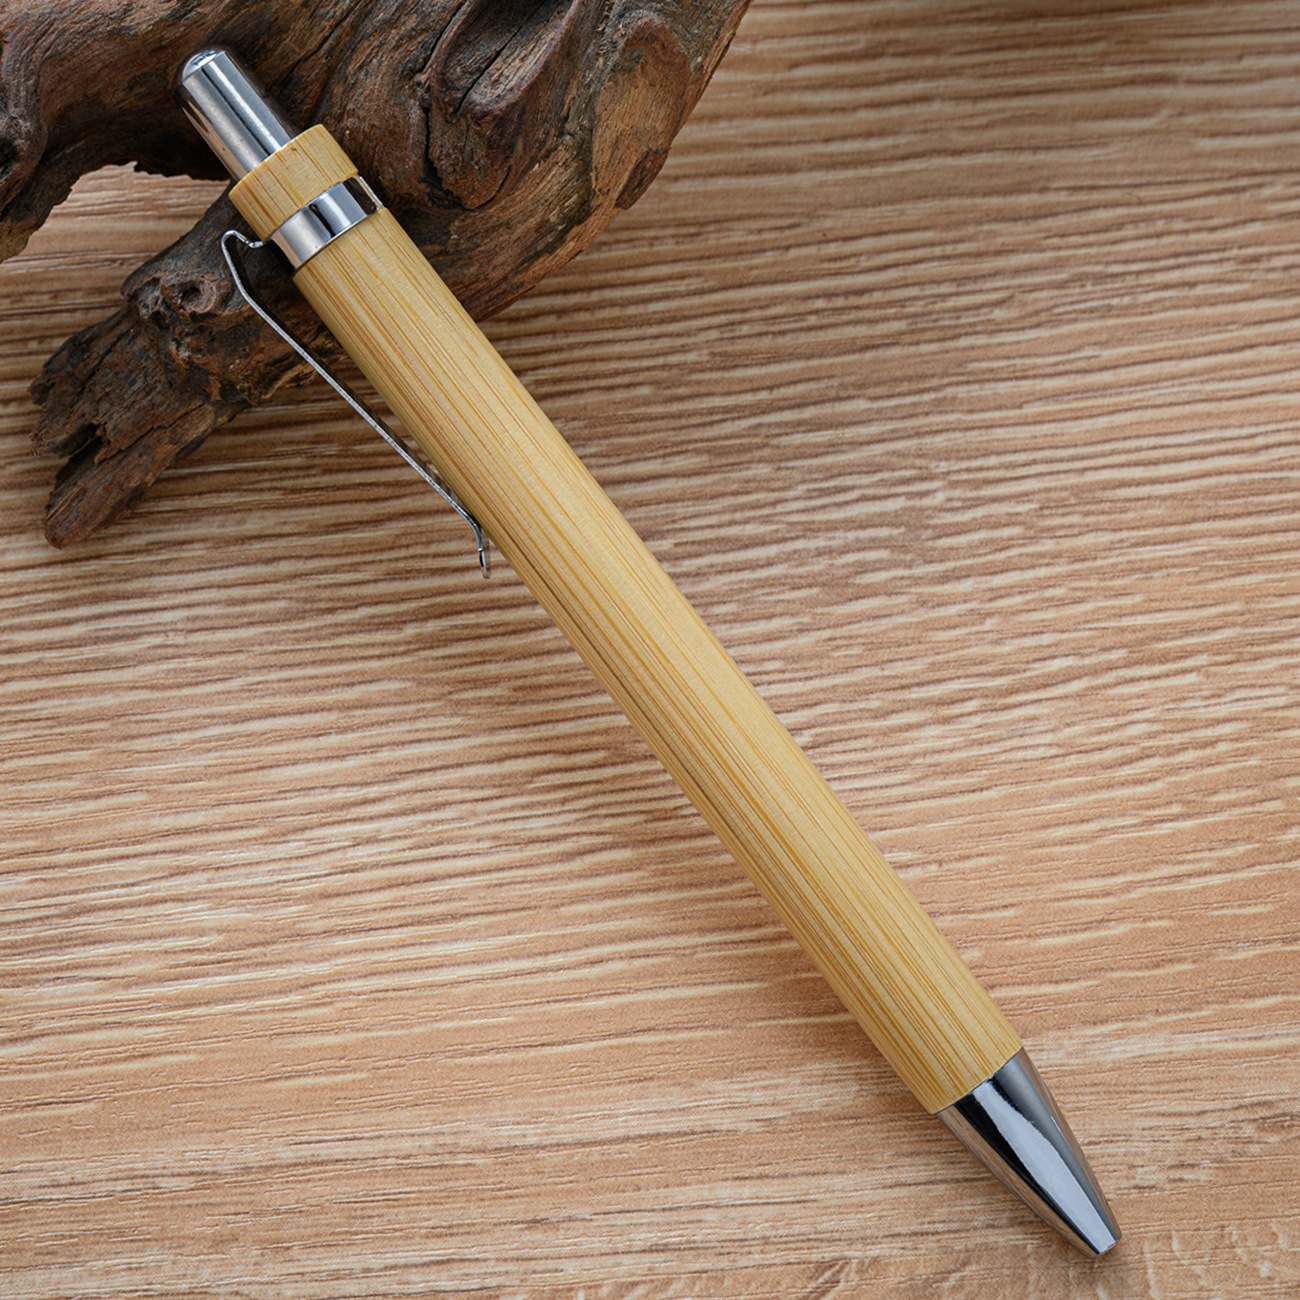 BAMBOO Wood Ballpoint Point 1,0 mm Tip Black Ink Business Signature Ball Pen Office School Wrting Stationery 100pcs